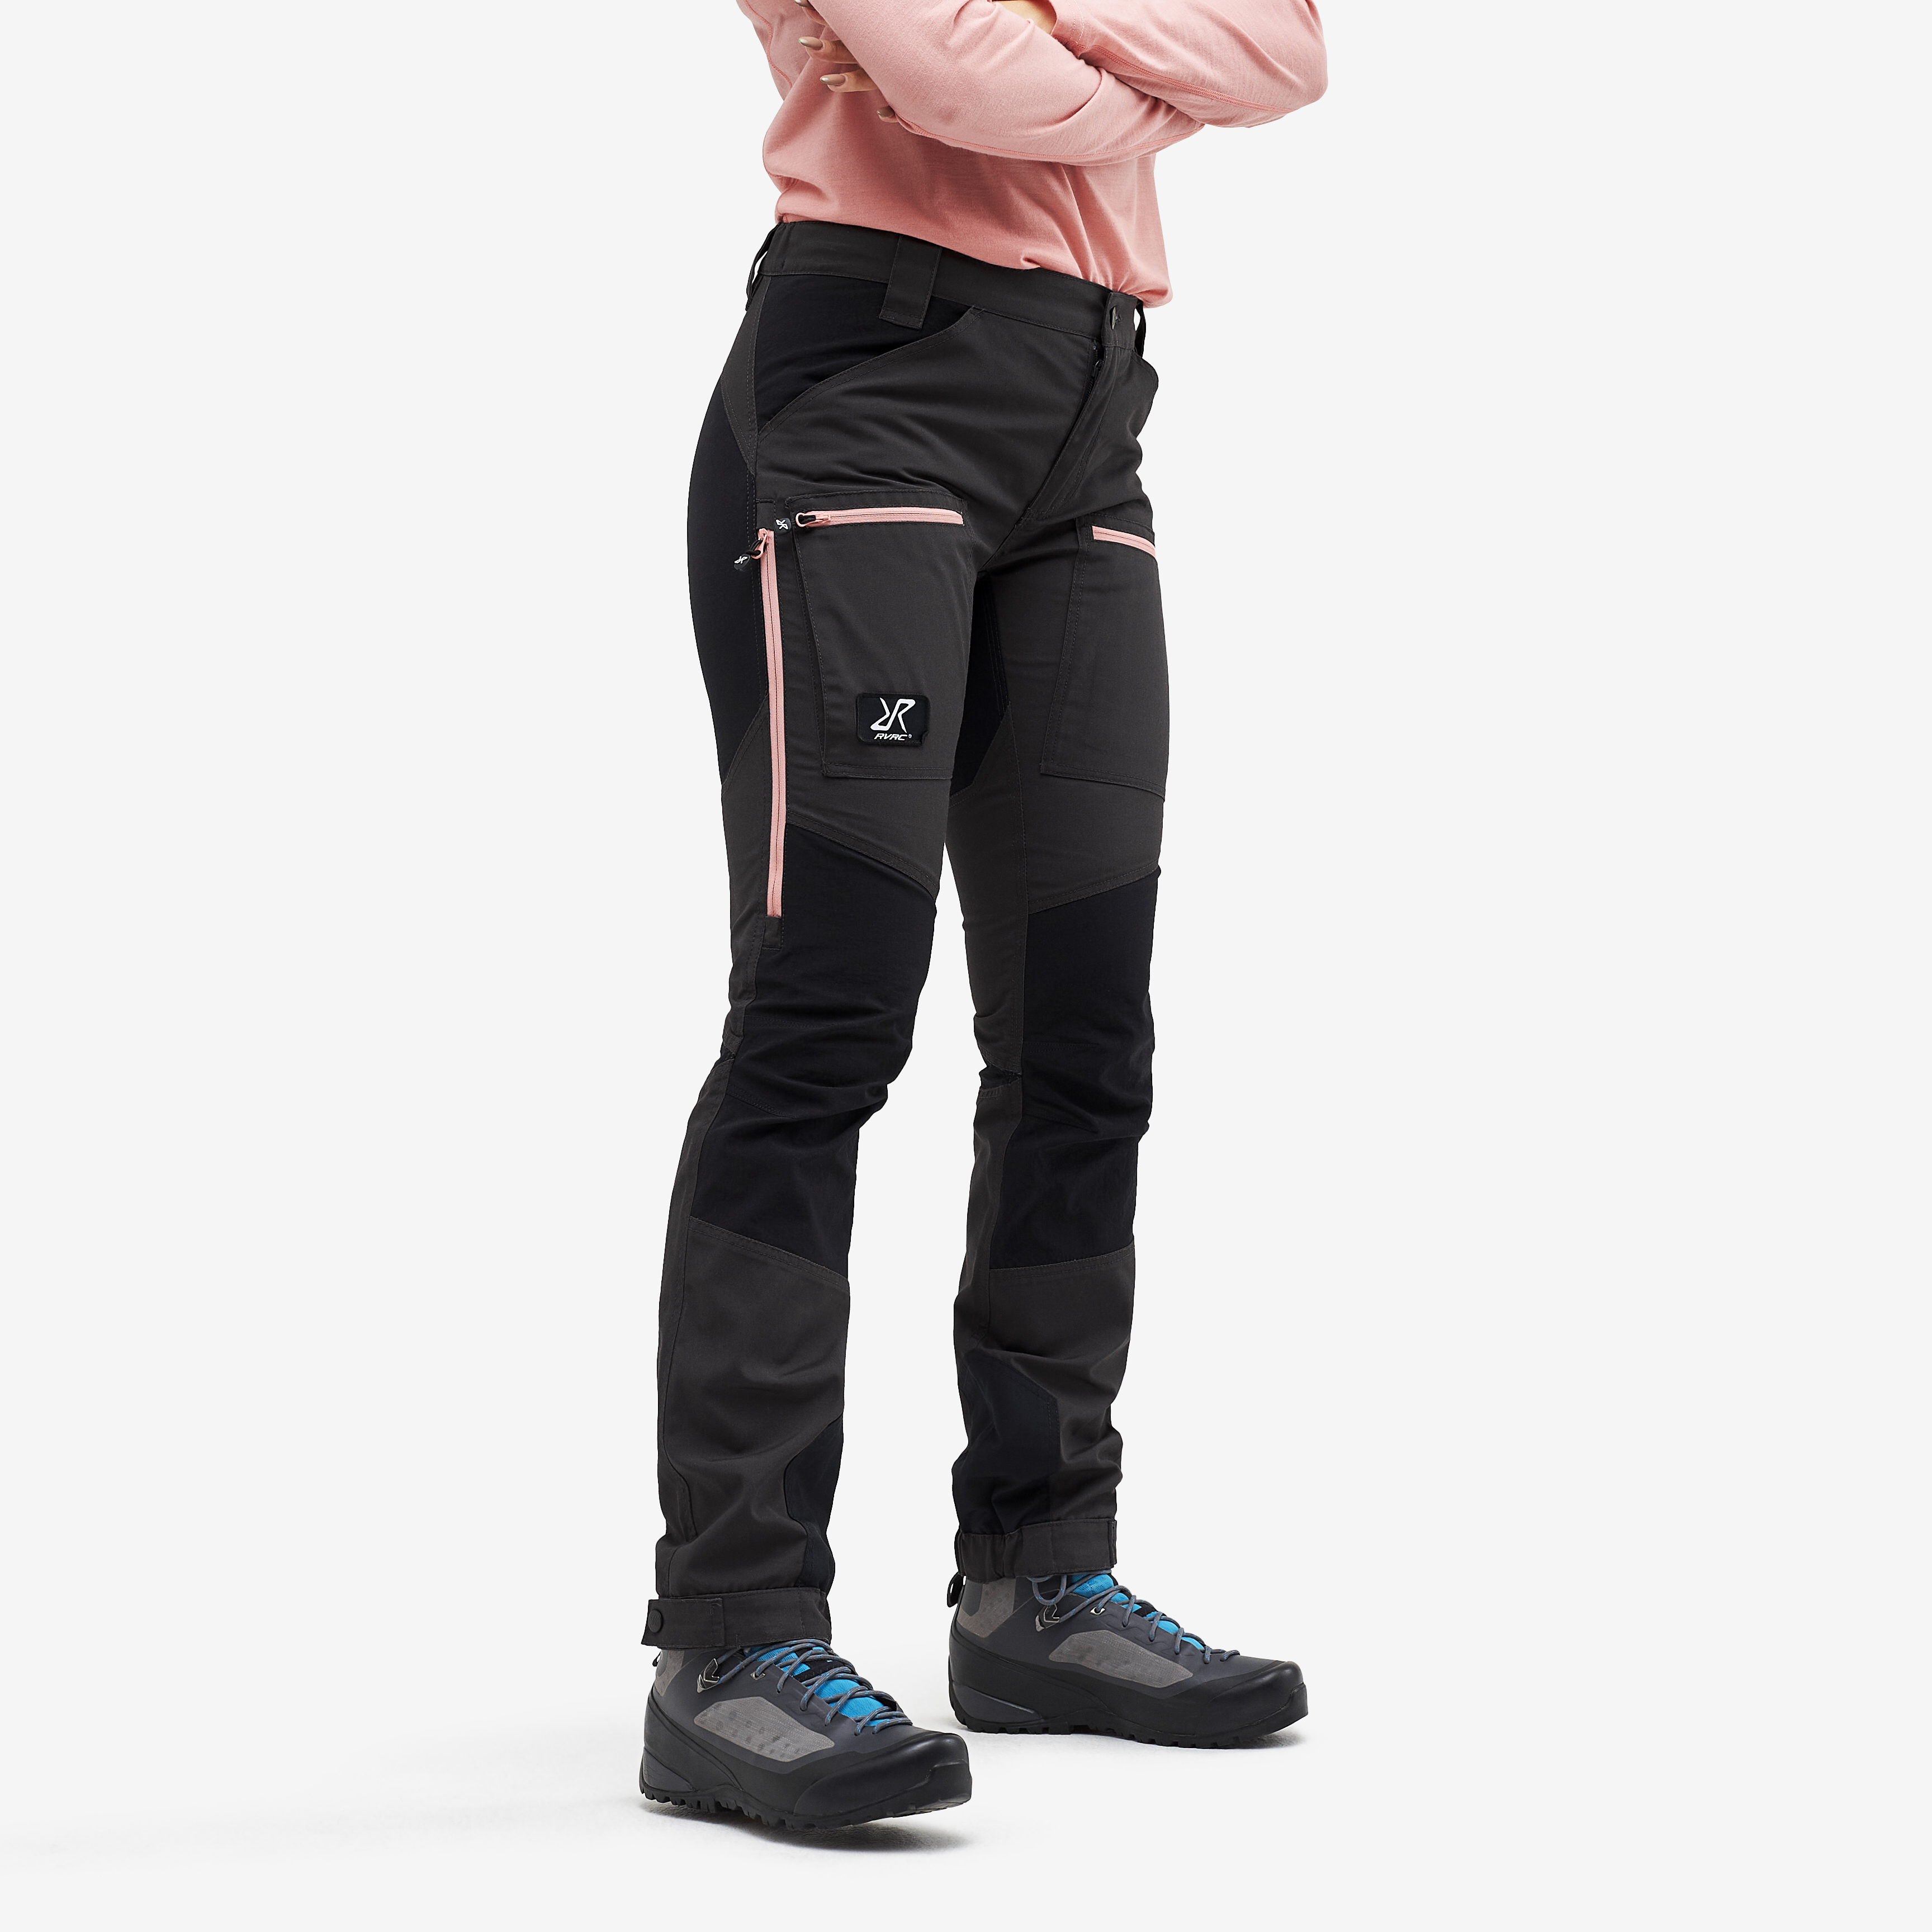 Nordwand Pro Pants Anthracite/Dusty pink Femme